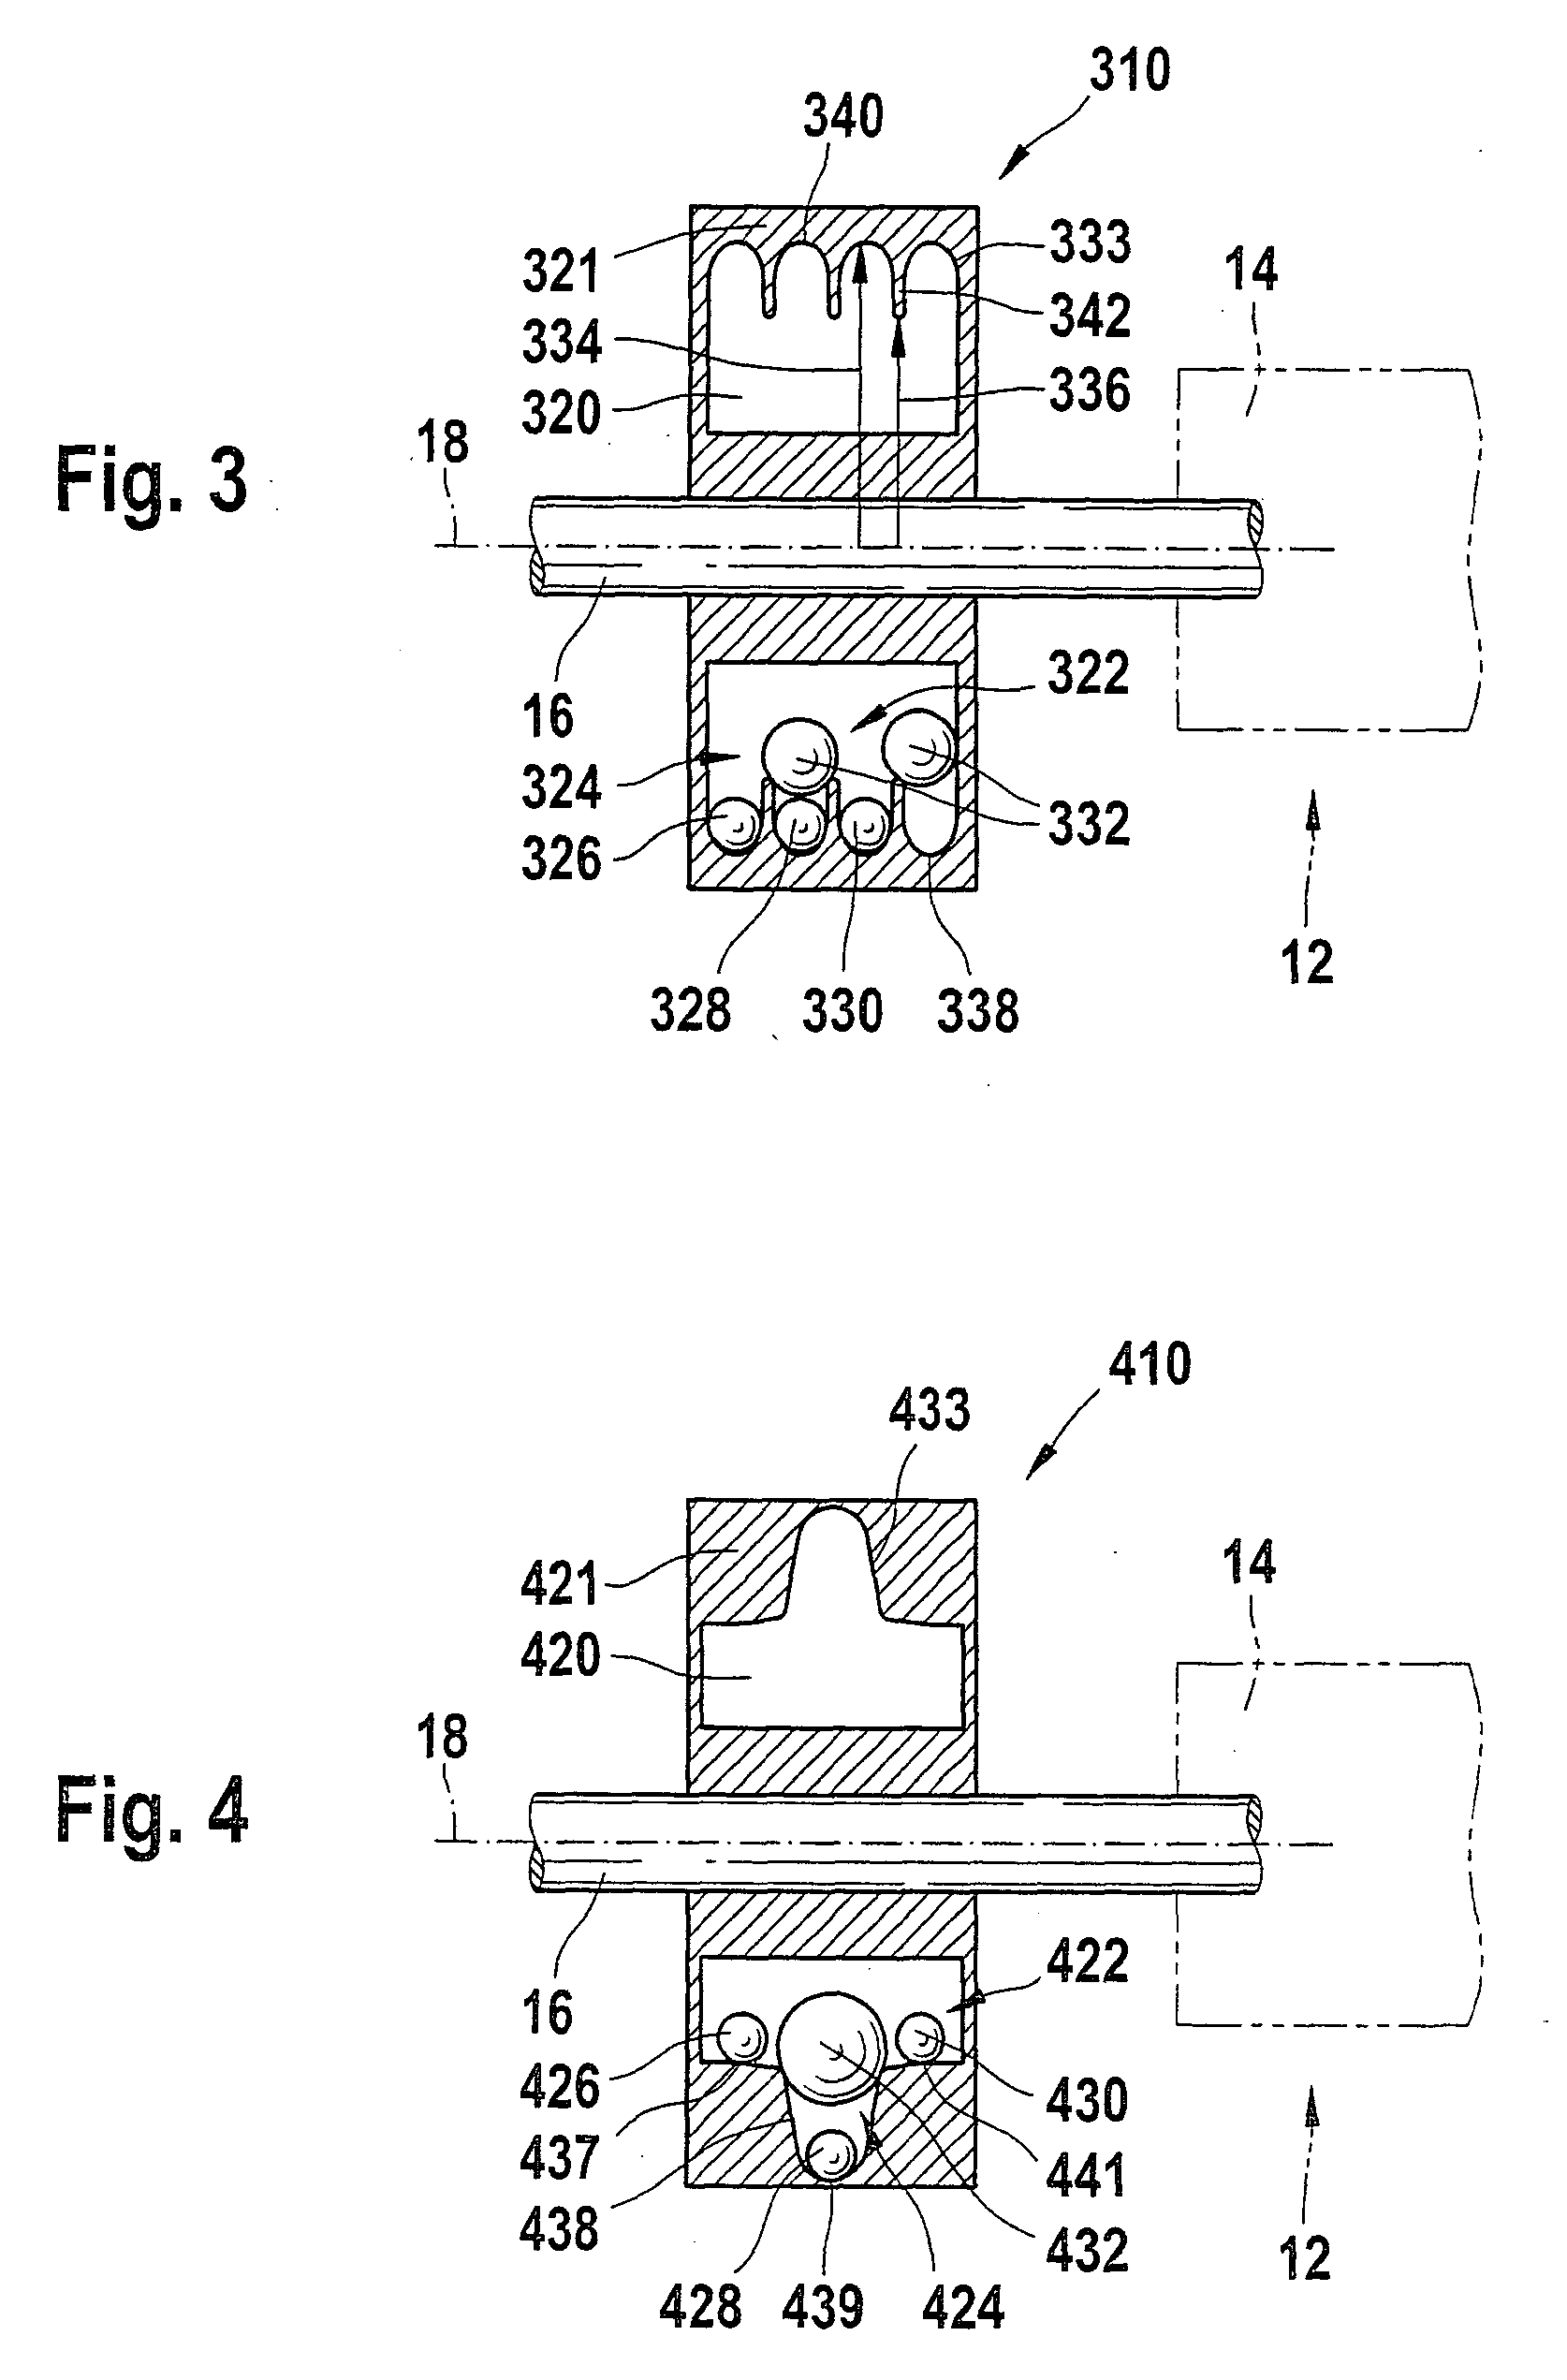 Device and method for balancing rotating systems